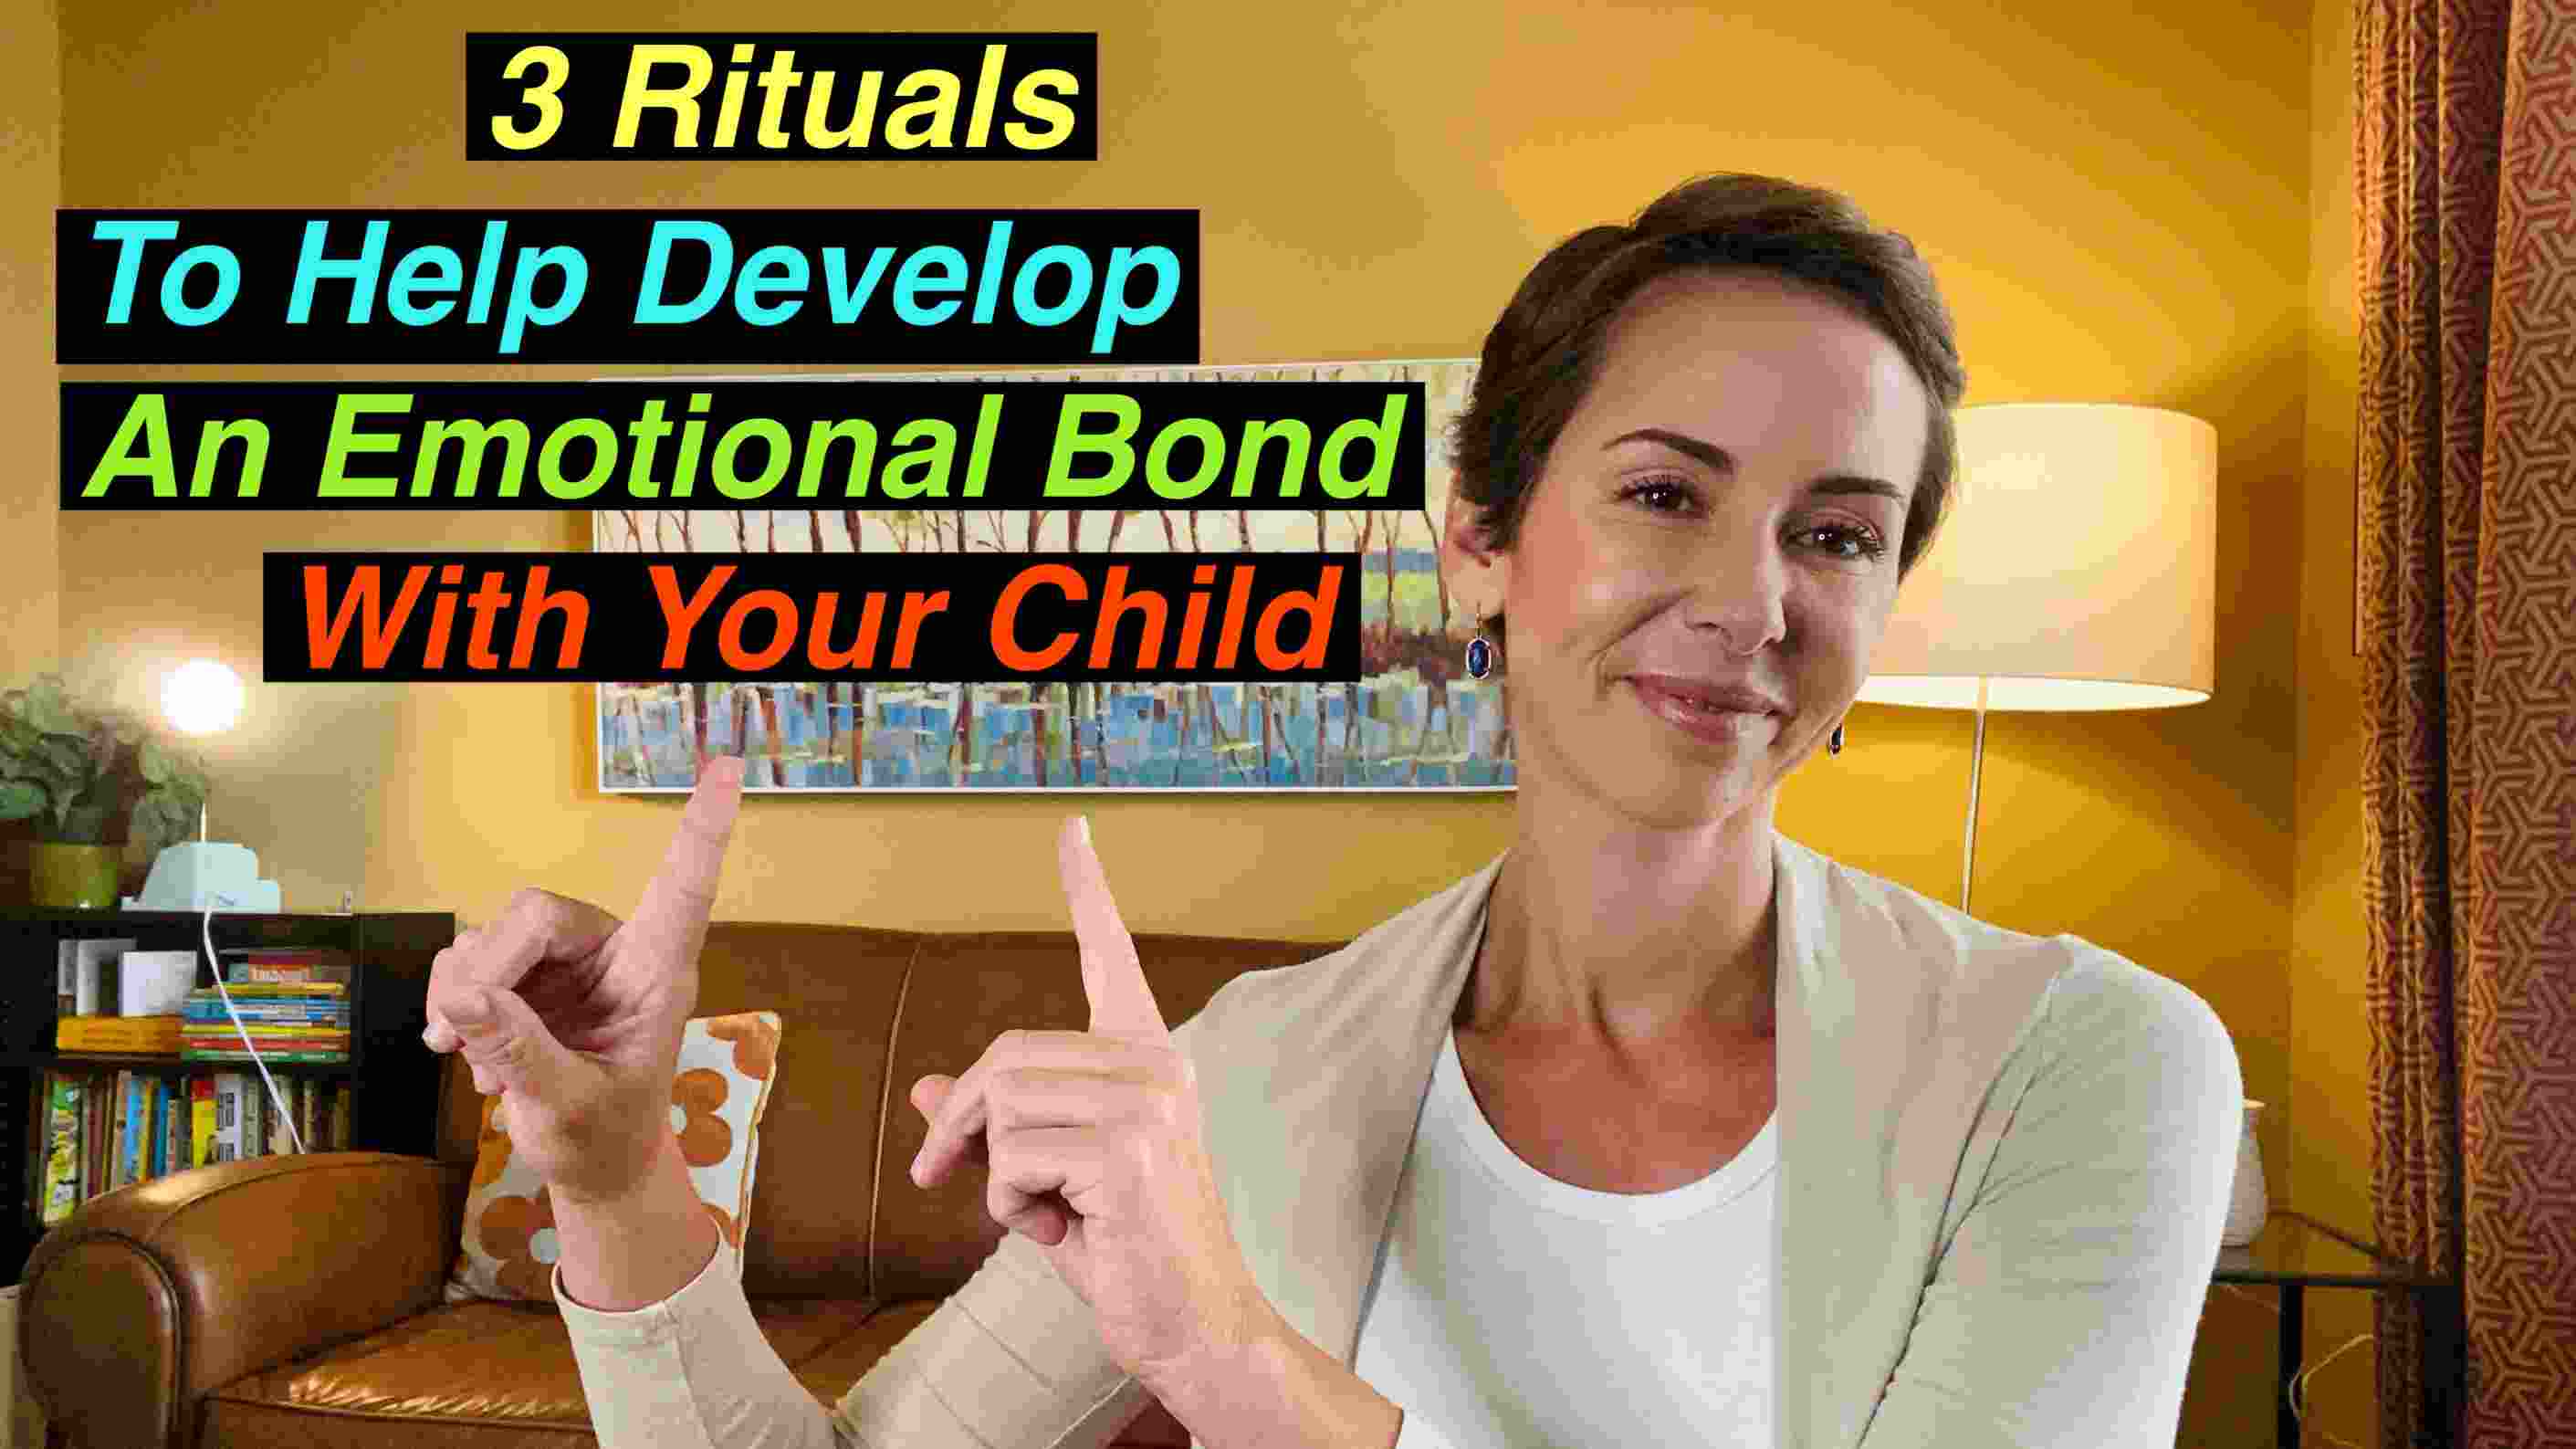 
Jourdan Travers, LCSW offers some simple advice on ways to bond with your child
